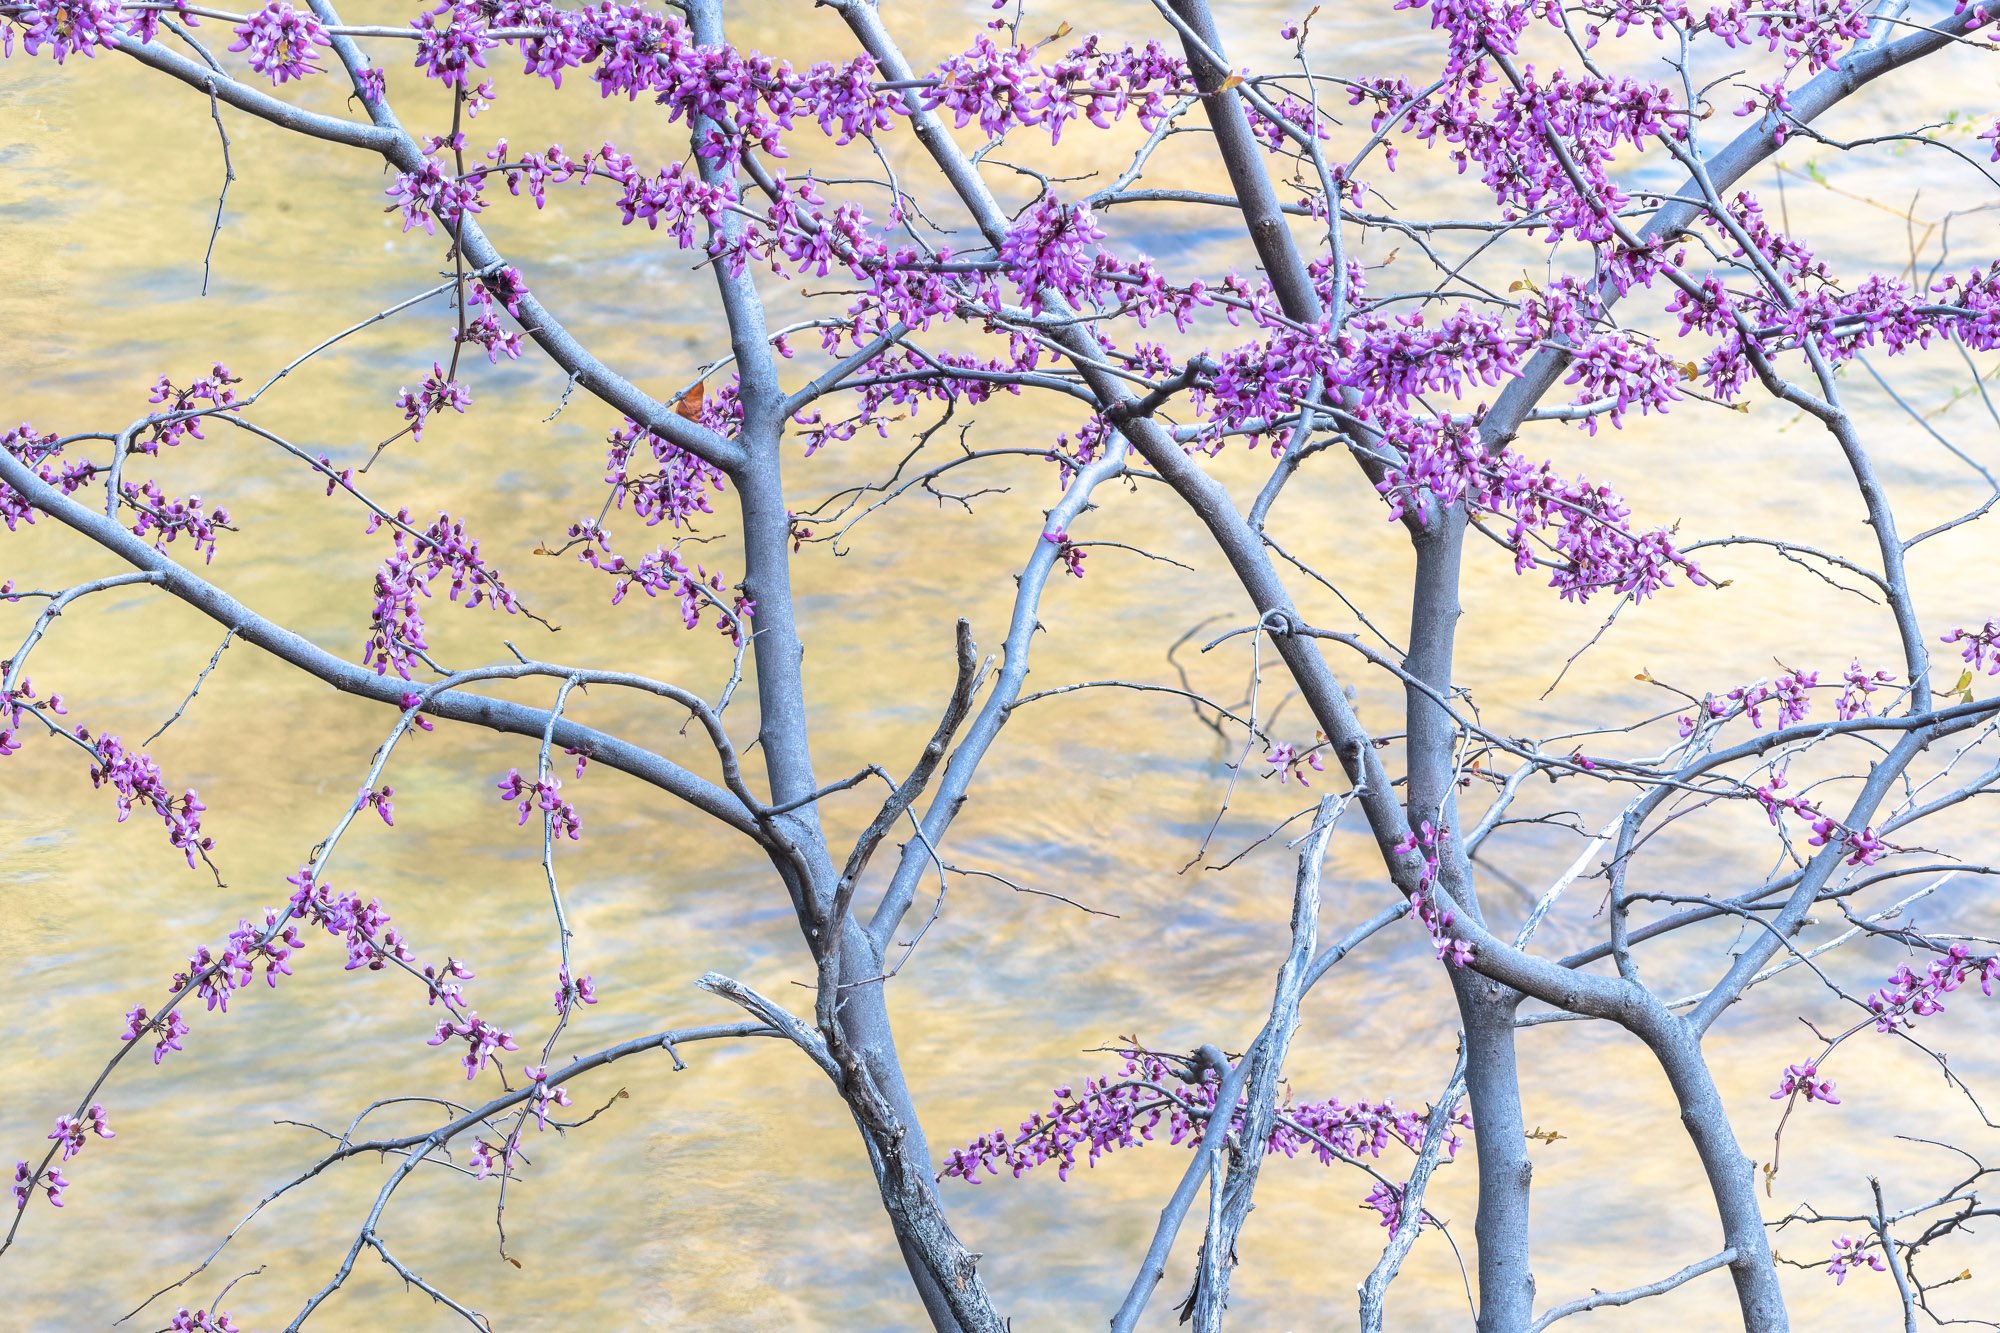 Redbud and Merced River, William Neill